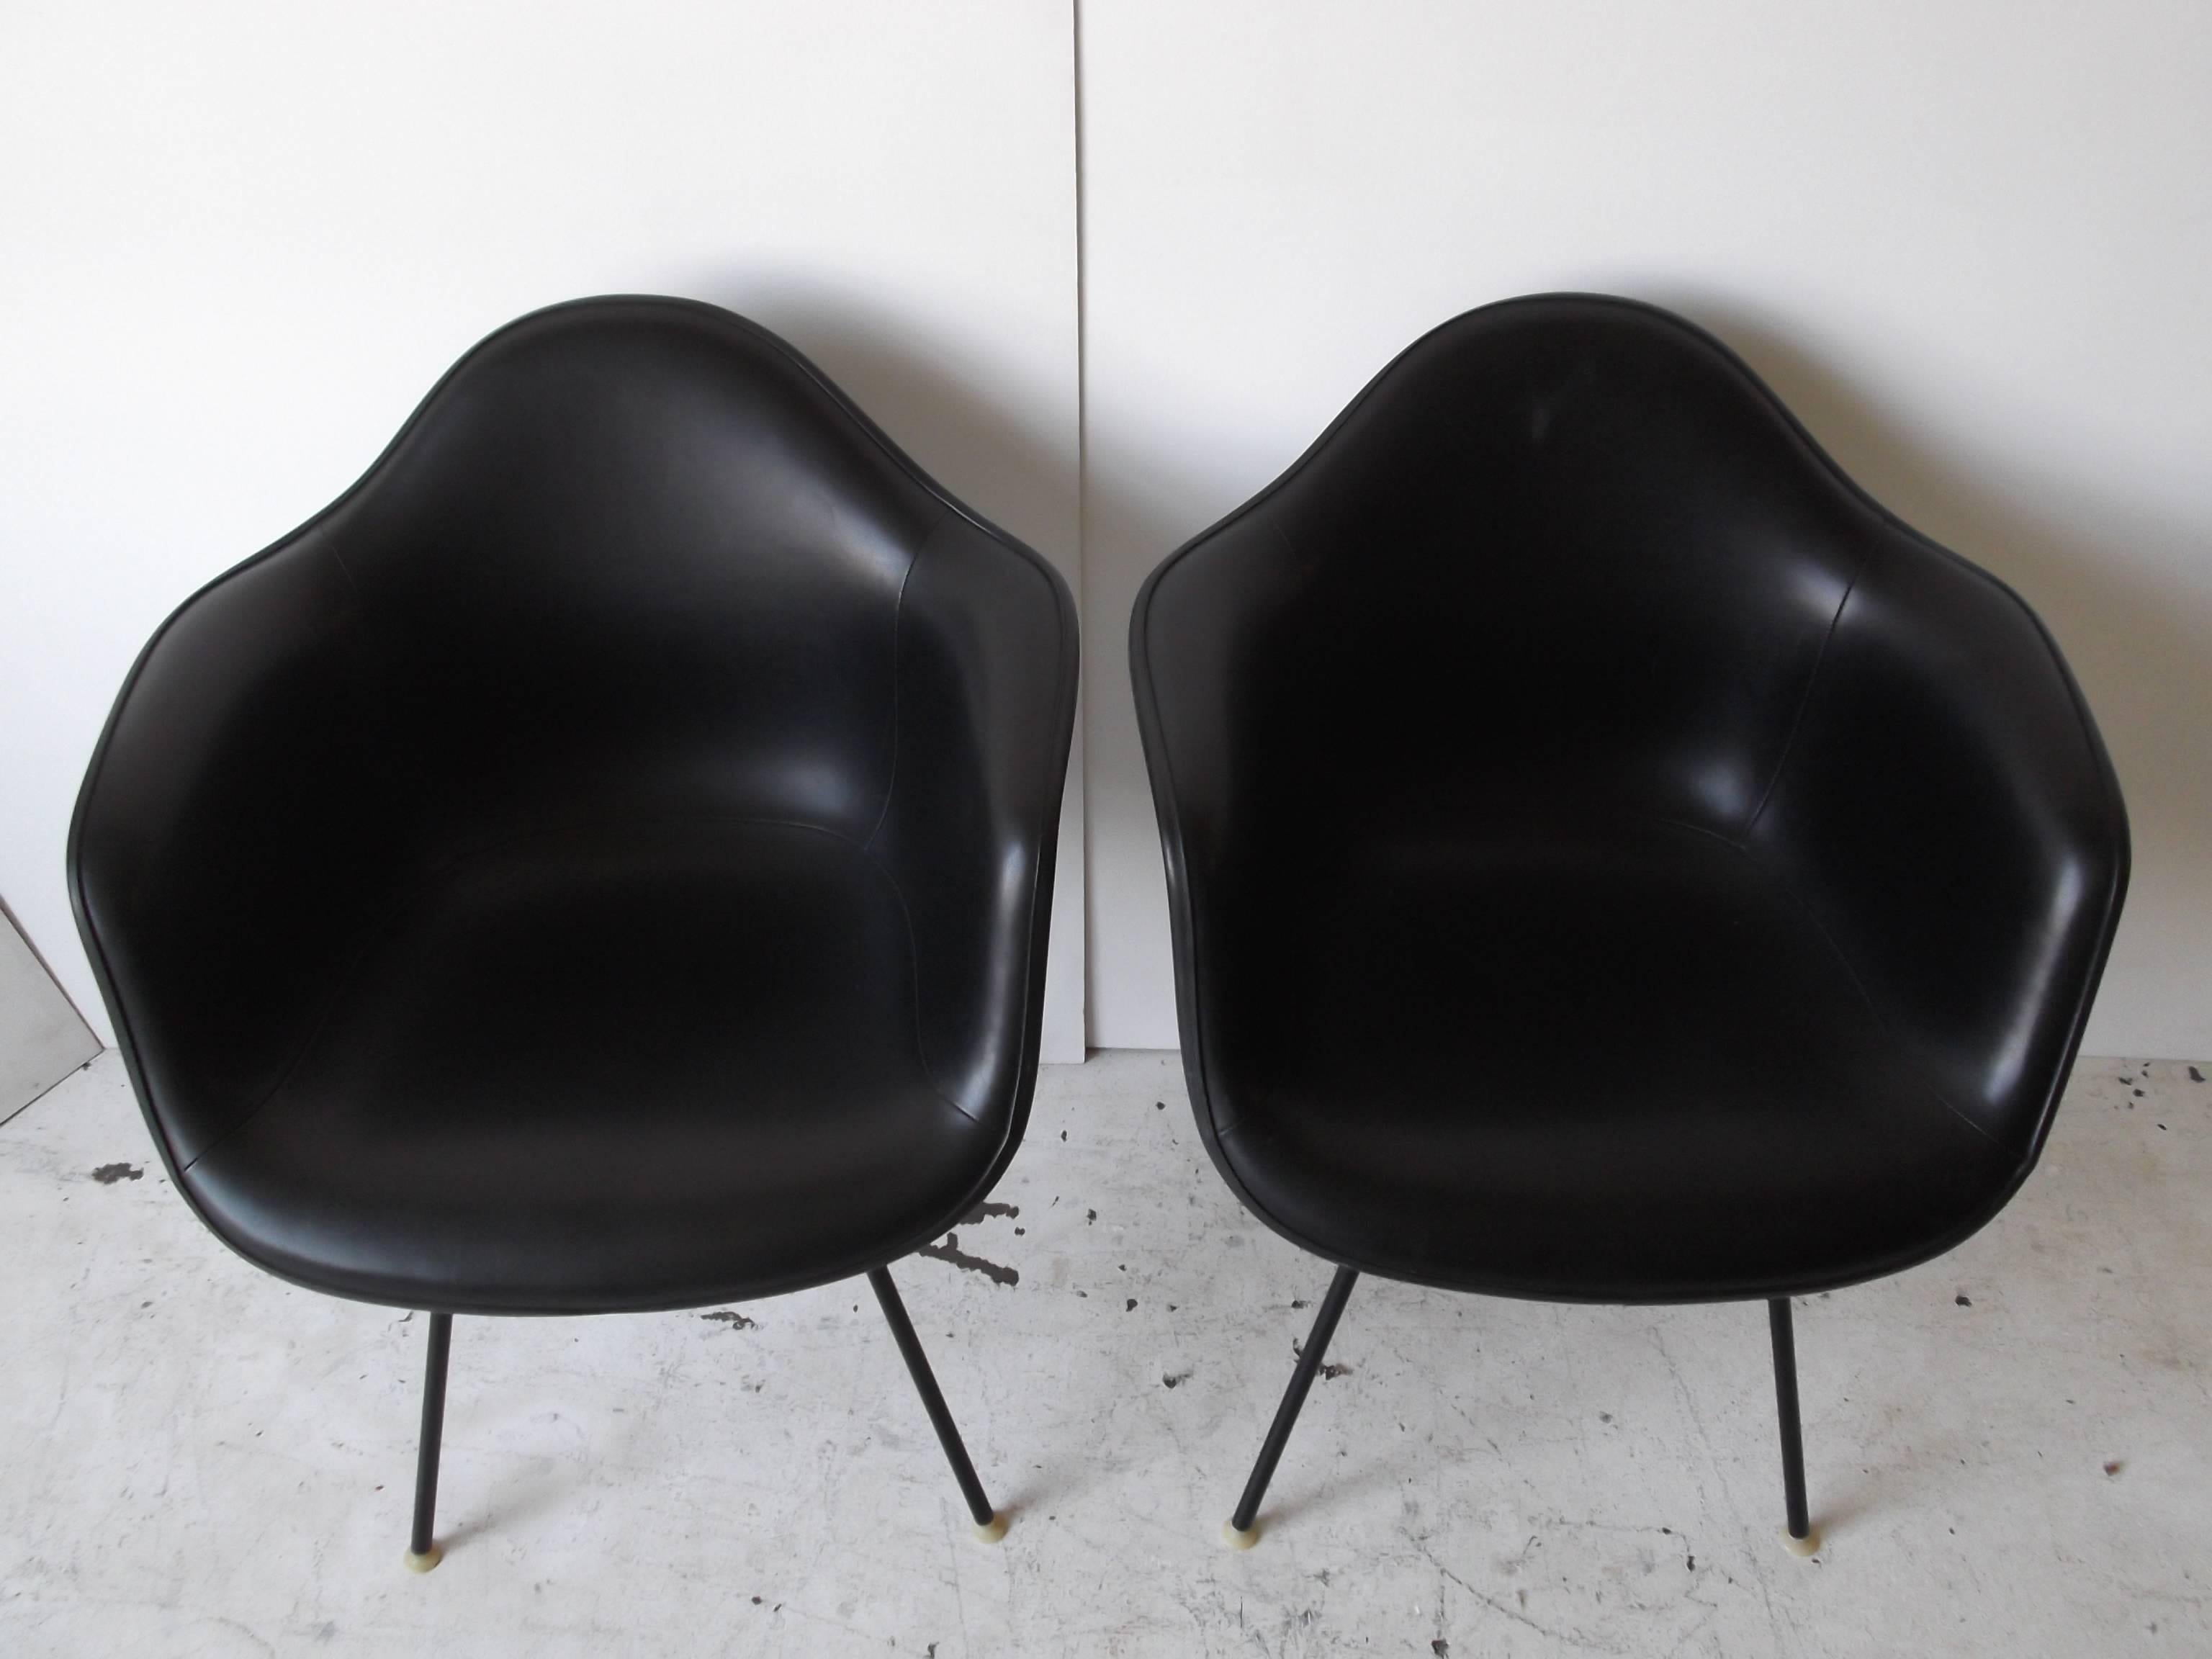 This is a fantastic set of vintage circa 1960s Eames armshells. They have black covers, with black fiberglass, on black legs? Great combo! All the foot glides are present. There are no tears, and the foam is good. They have the 'Circle S